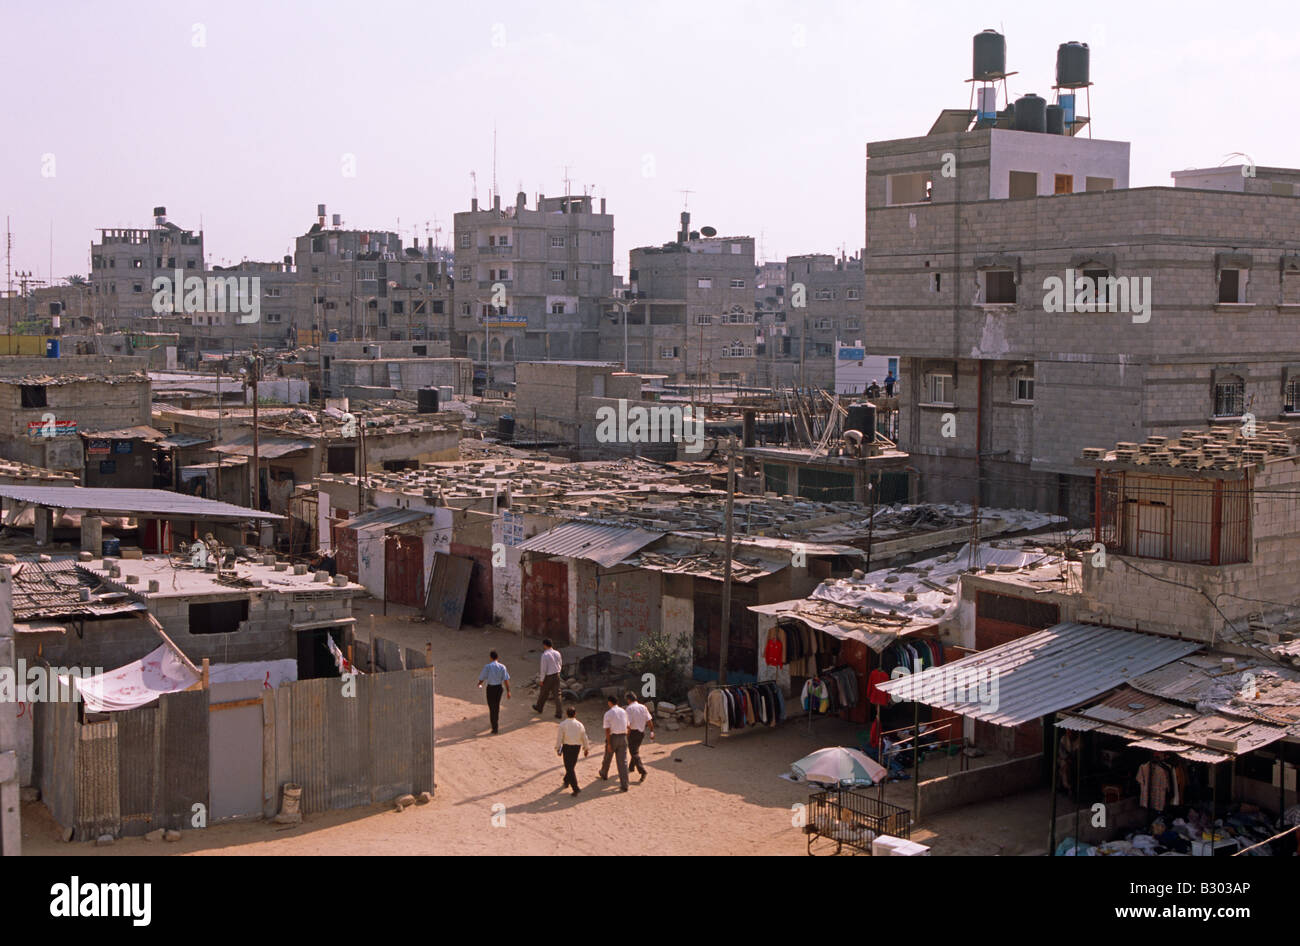 Rafah: The Vibrant City Of Palestine's Southern Border, Uncovered